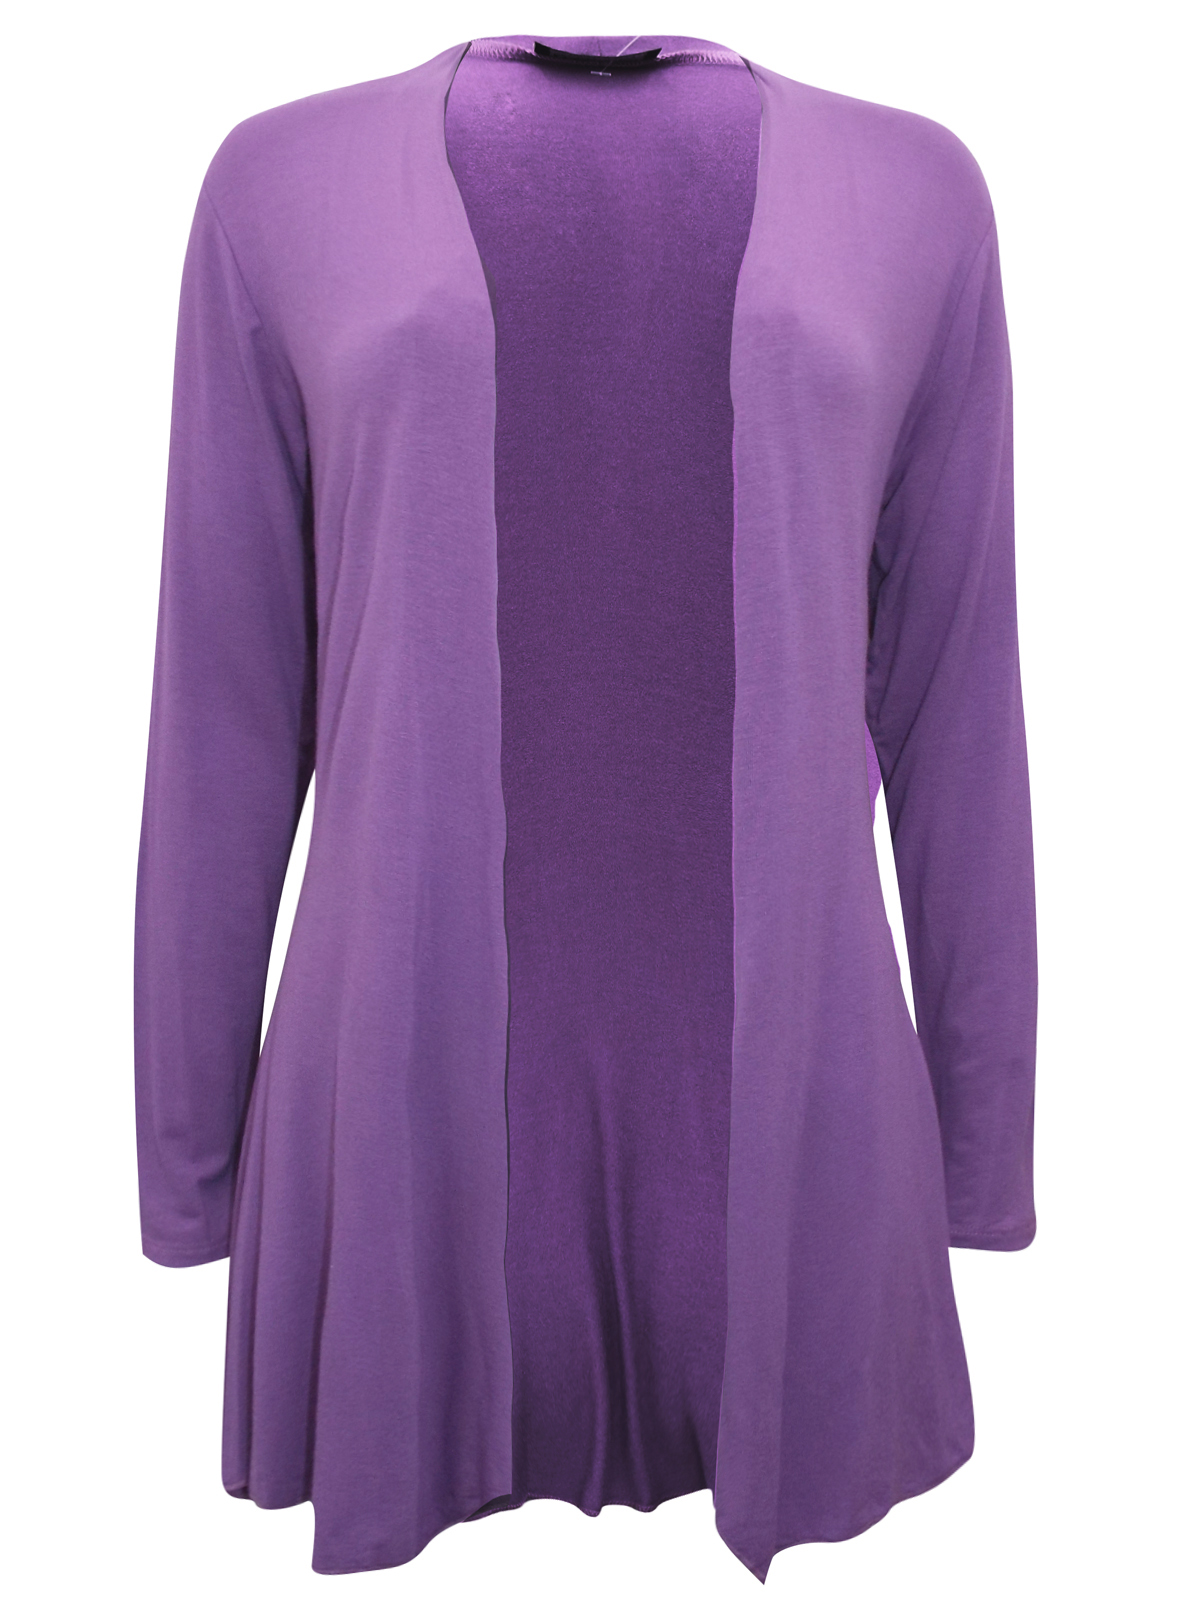 //text.. - - PURPLE Open Front Long Sleeve Jersey Cardigan - Size Small ...